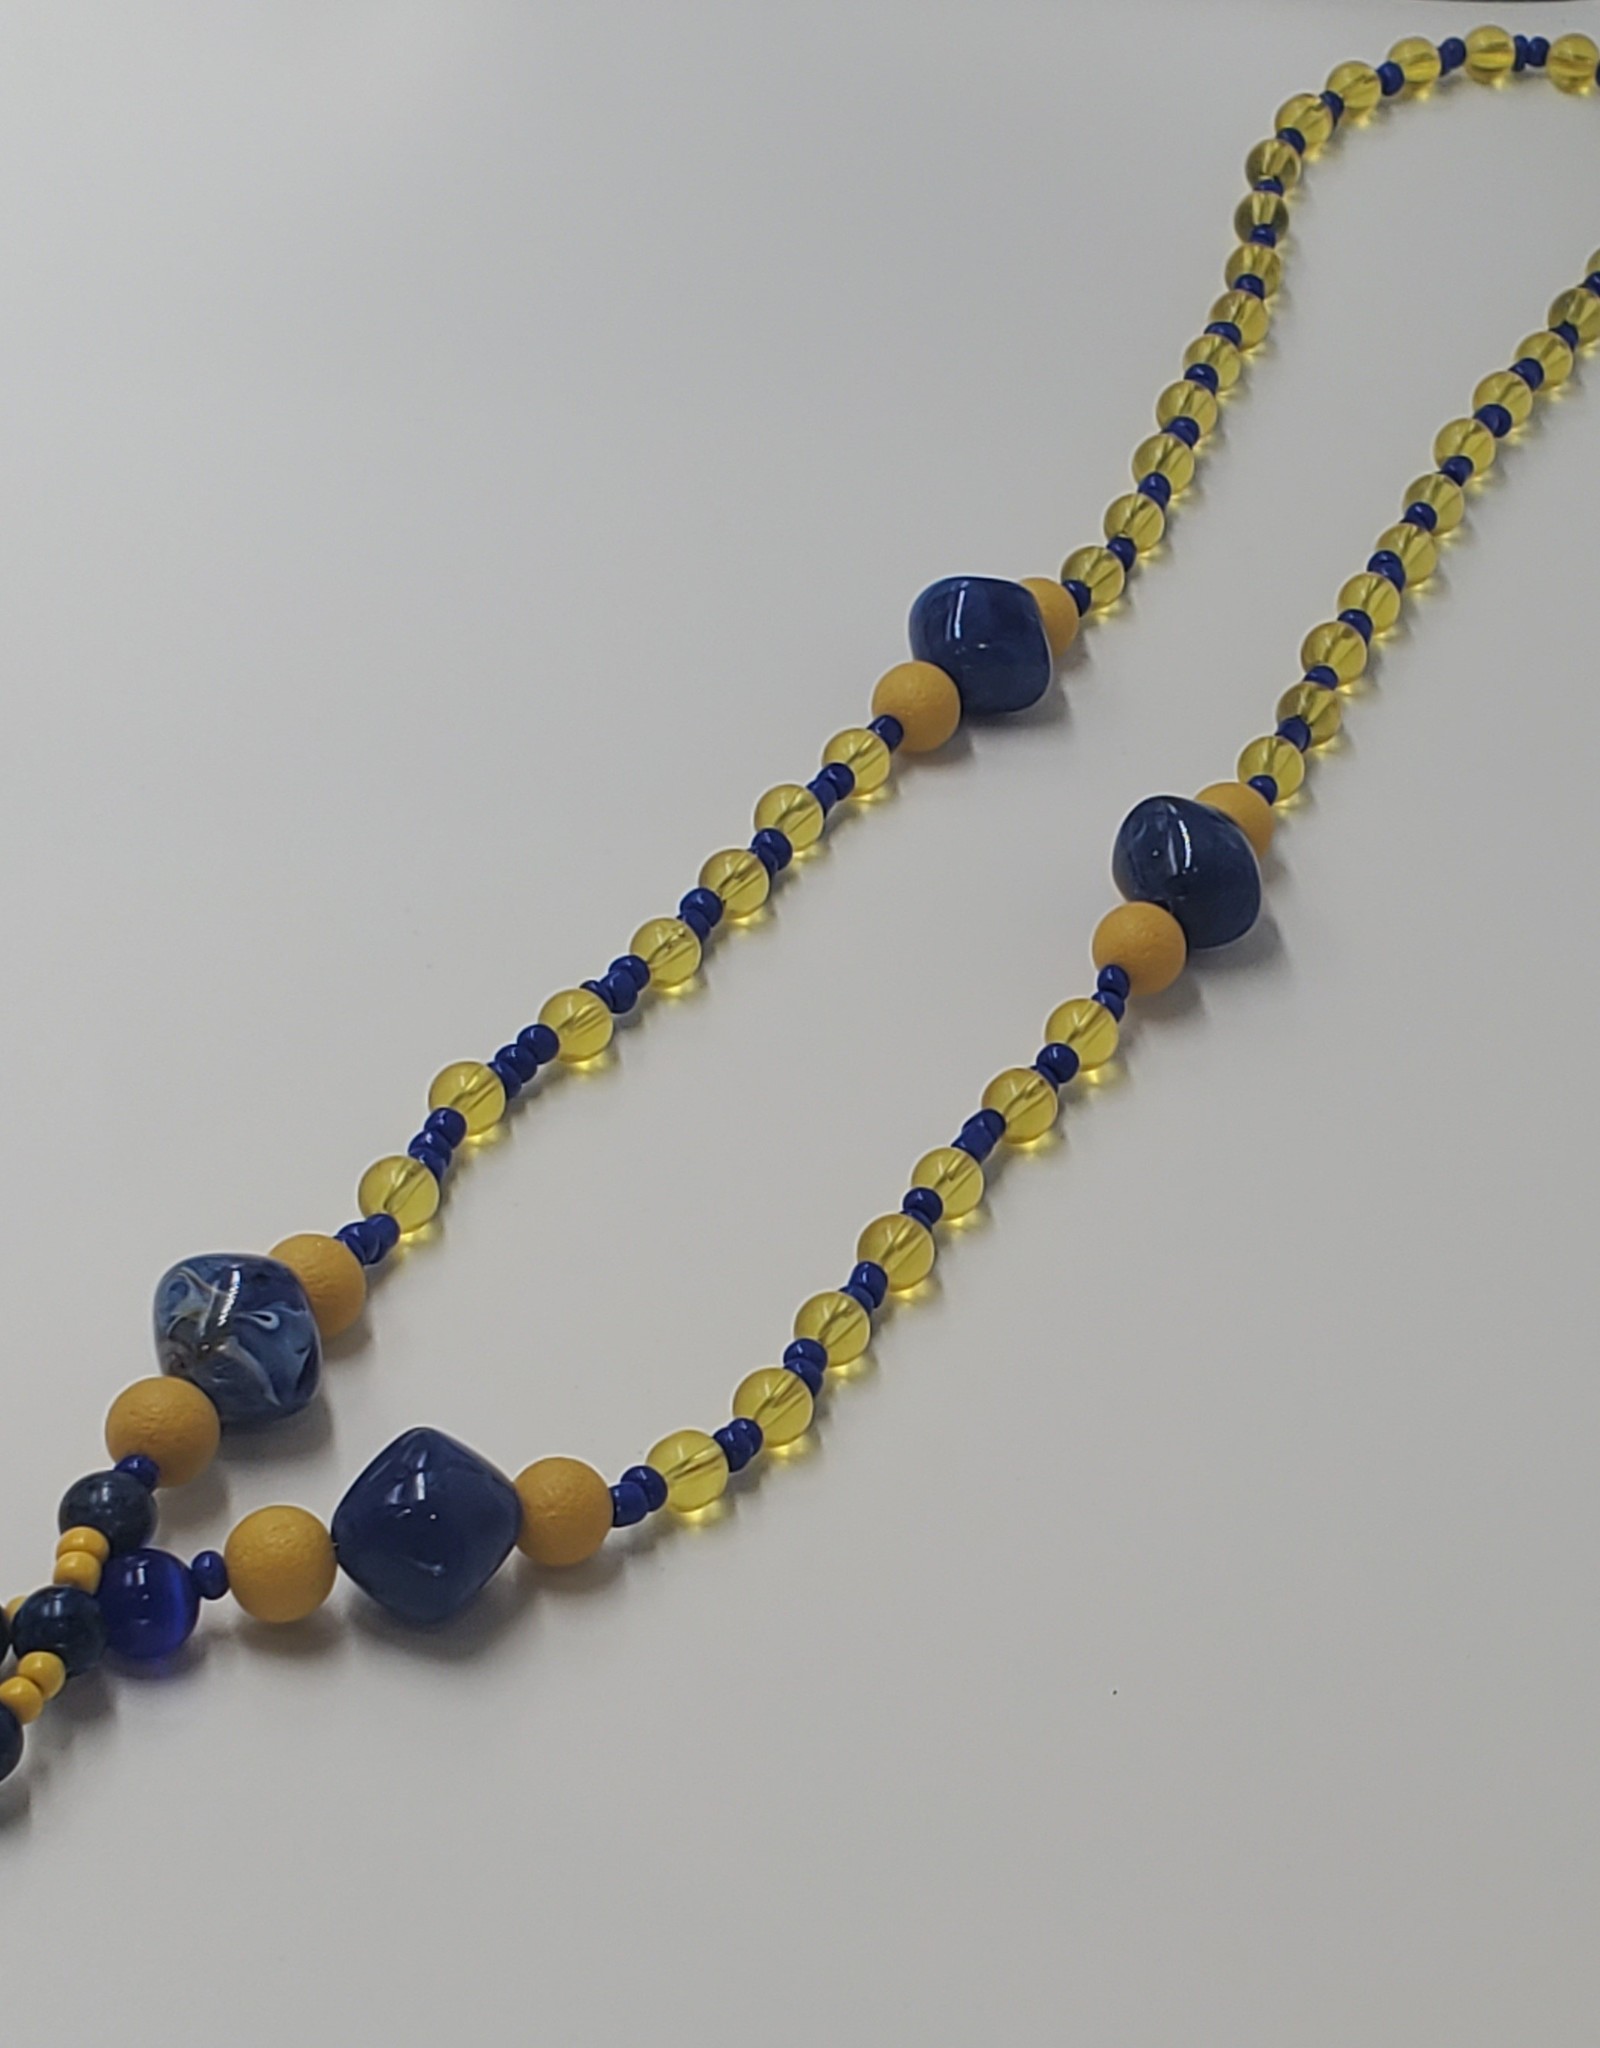 Blue and Gold Bead Lanyard